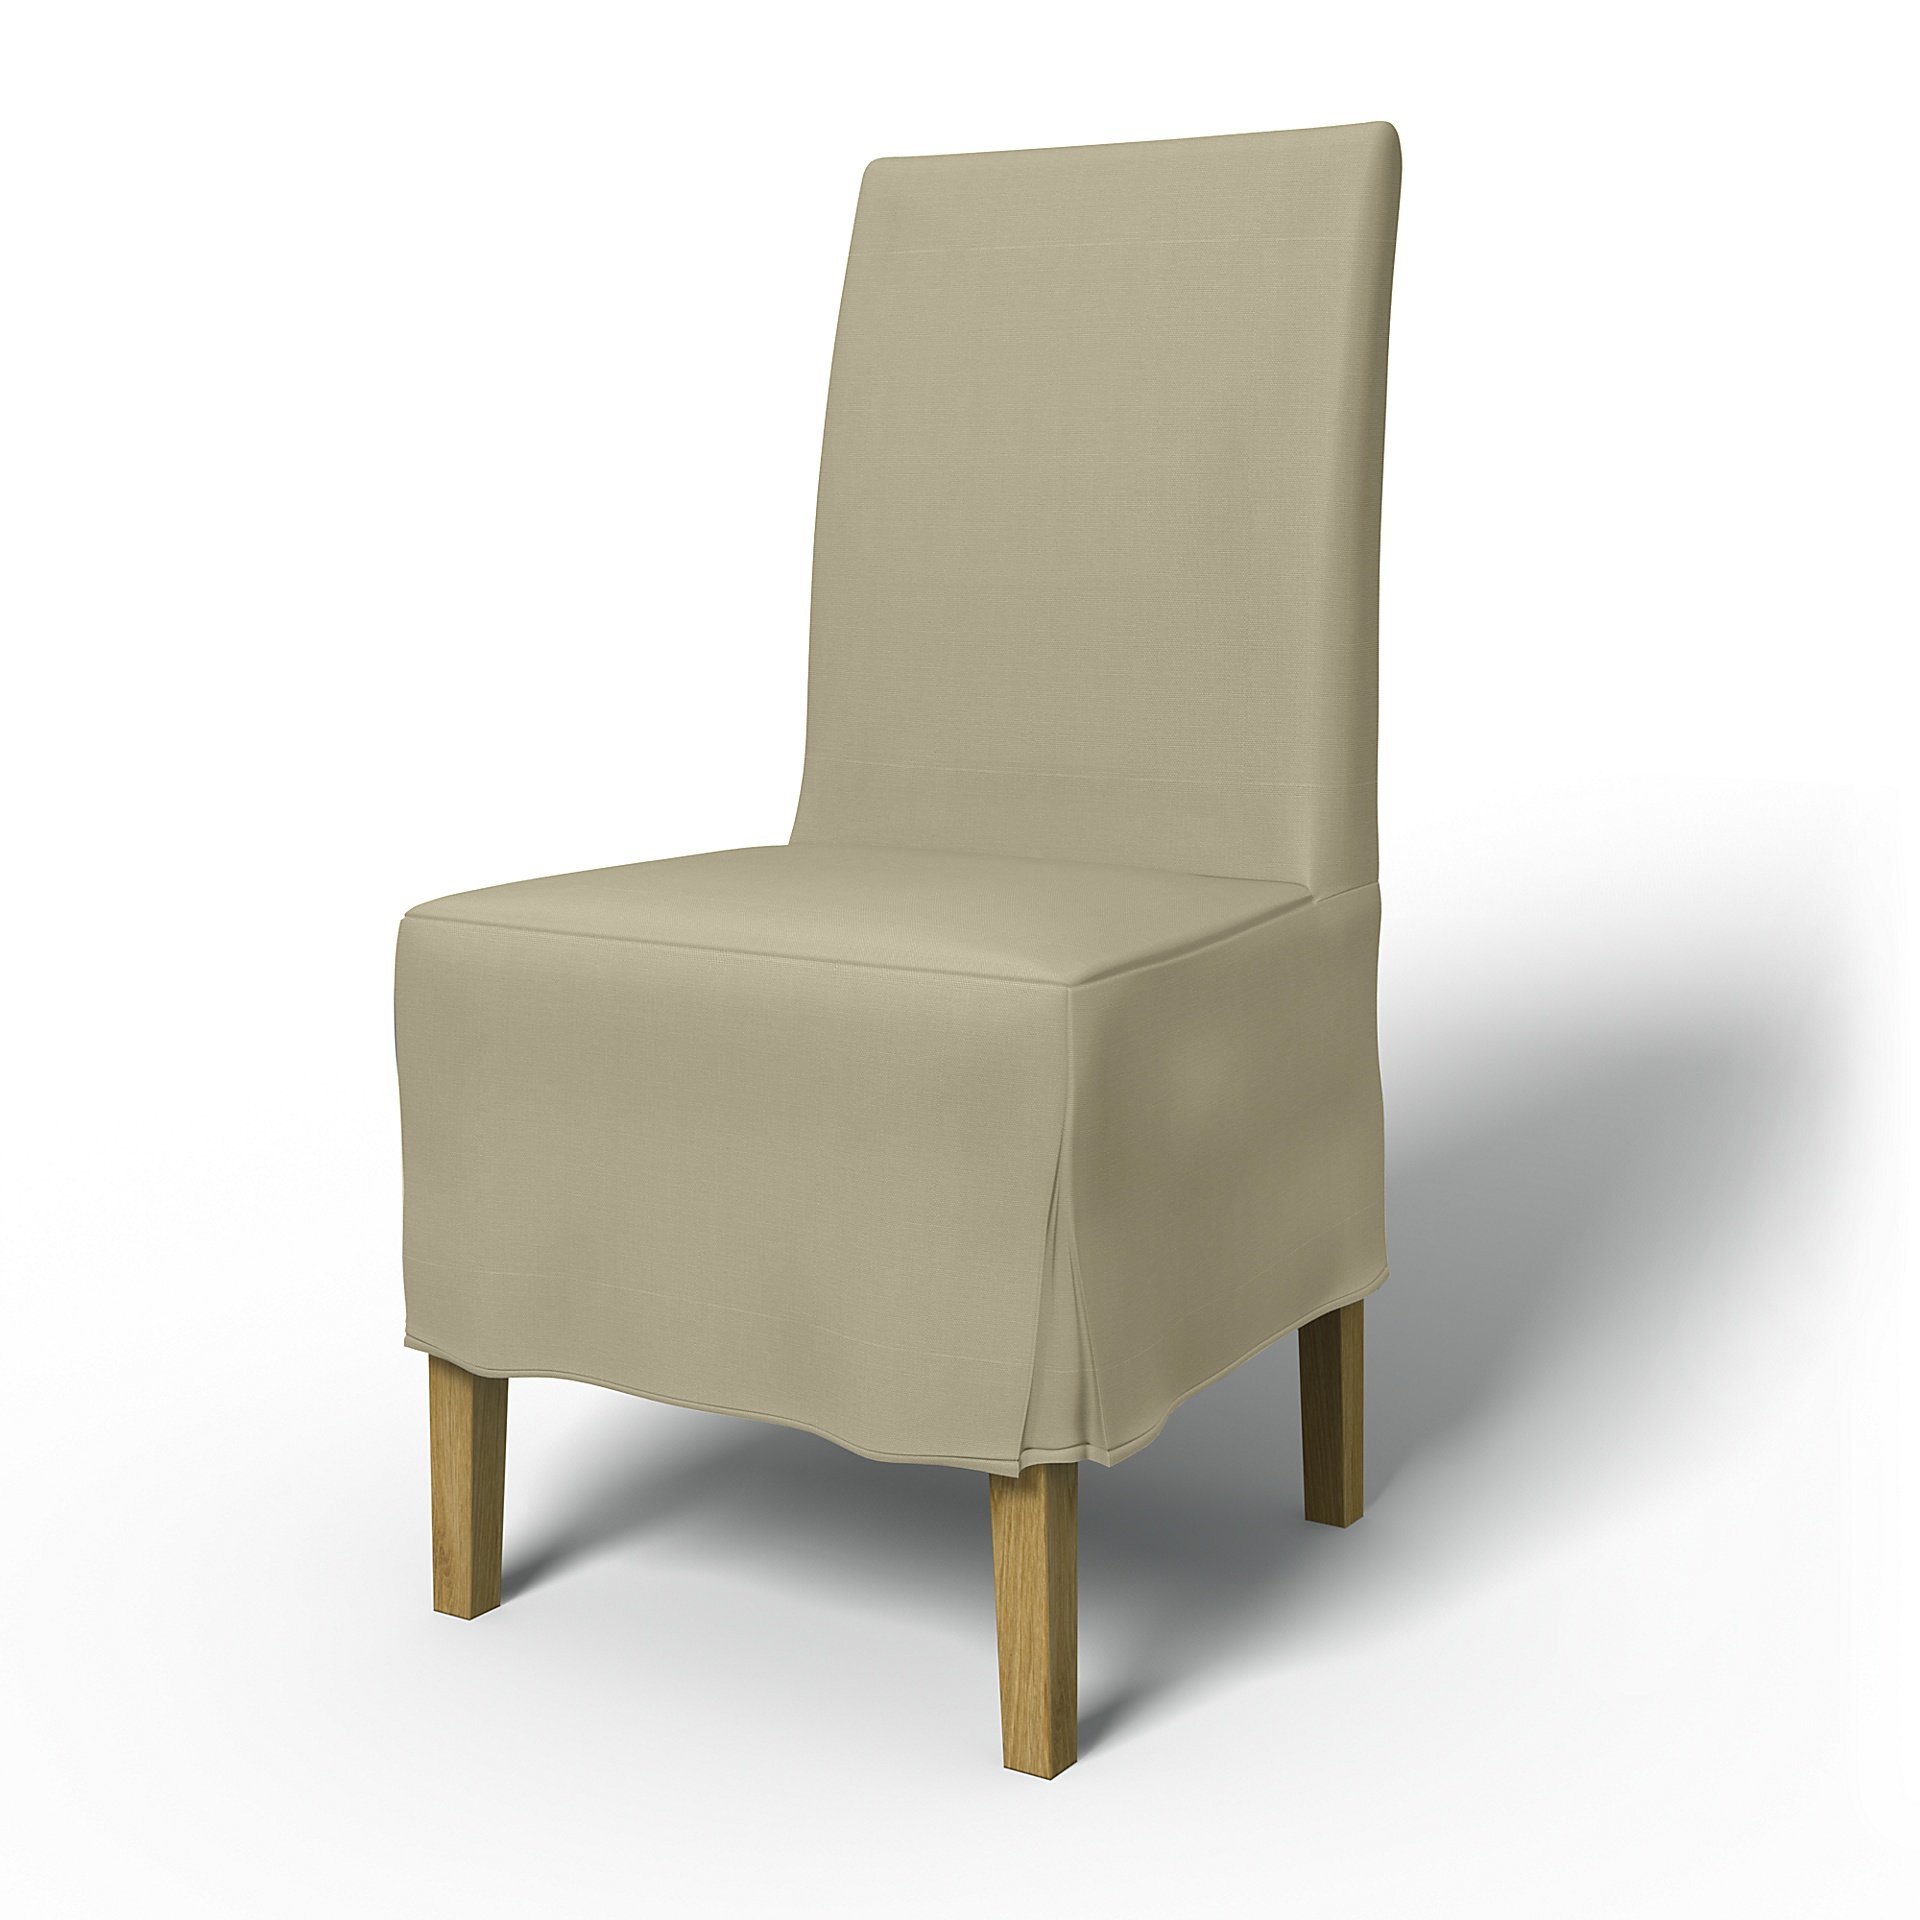 IKEA - Henriksdal Dining Chair Cover Medium skirt with Box Pleat (Standard model), Sand Beige, Cotto